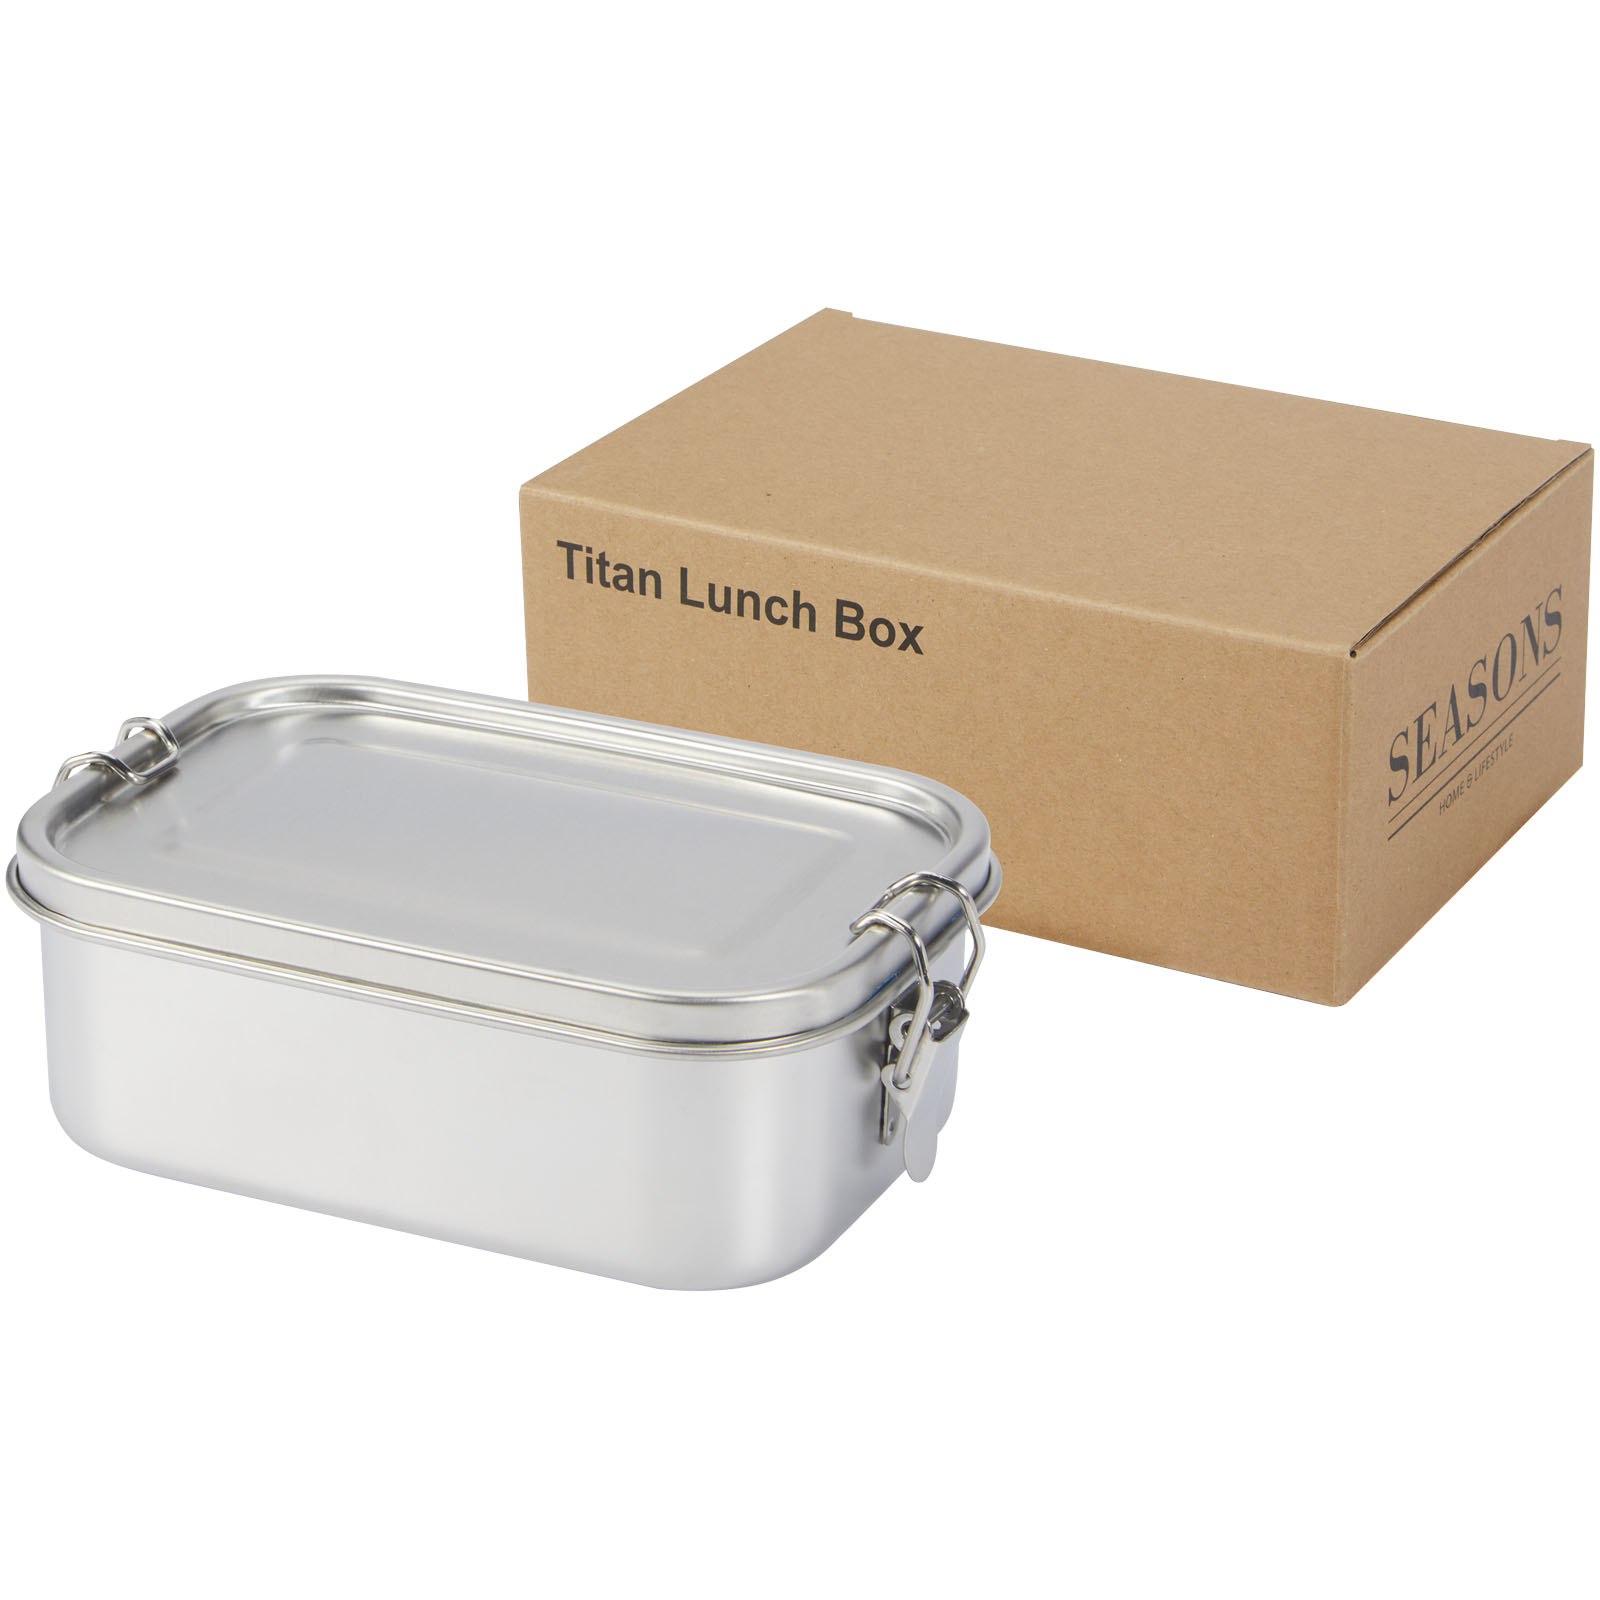 Home & Kitchen - Titan recycled stainless steel lunch box